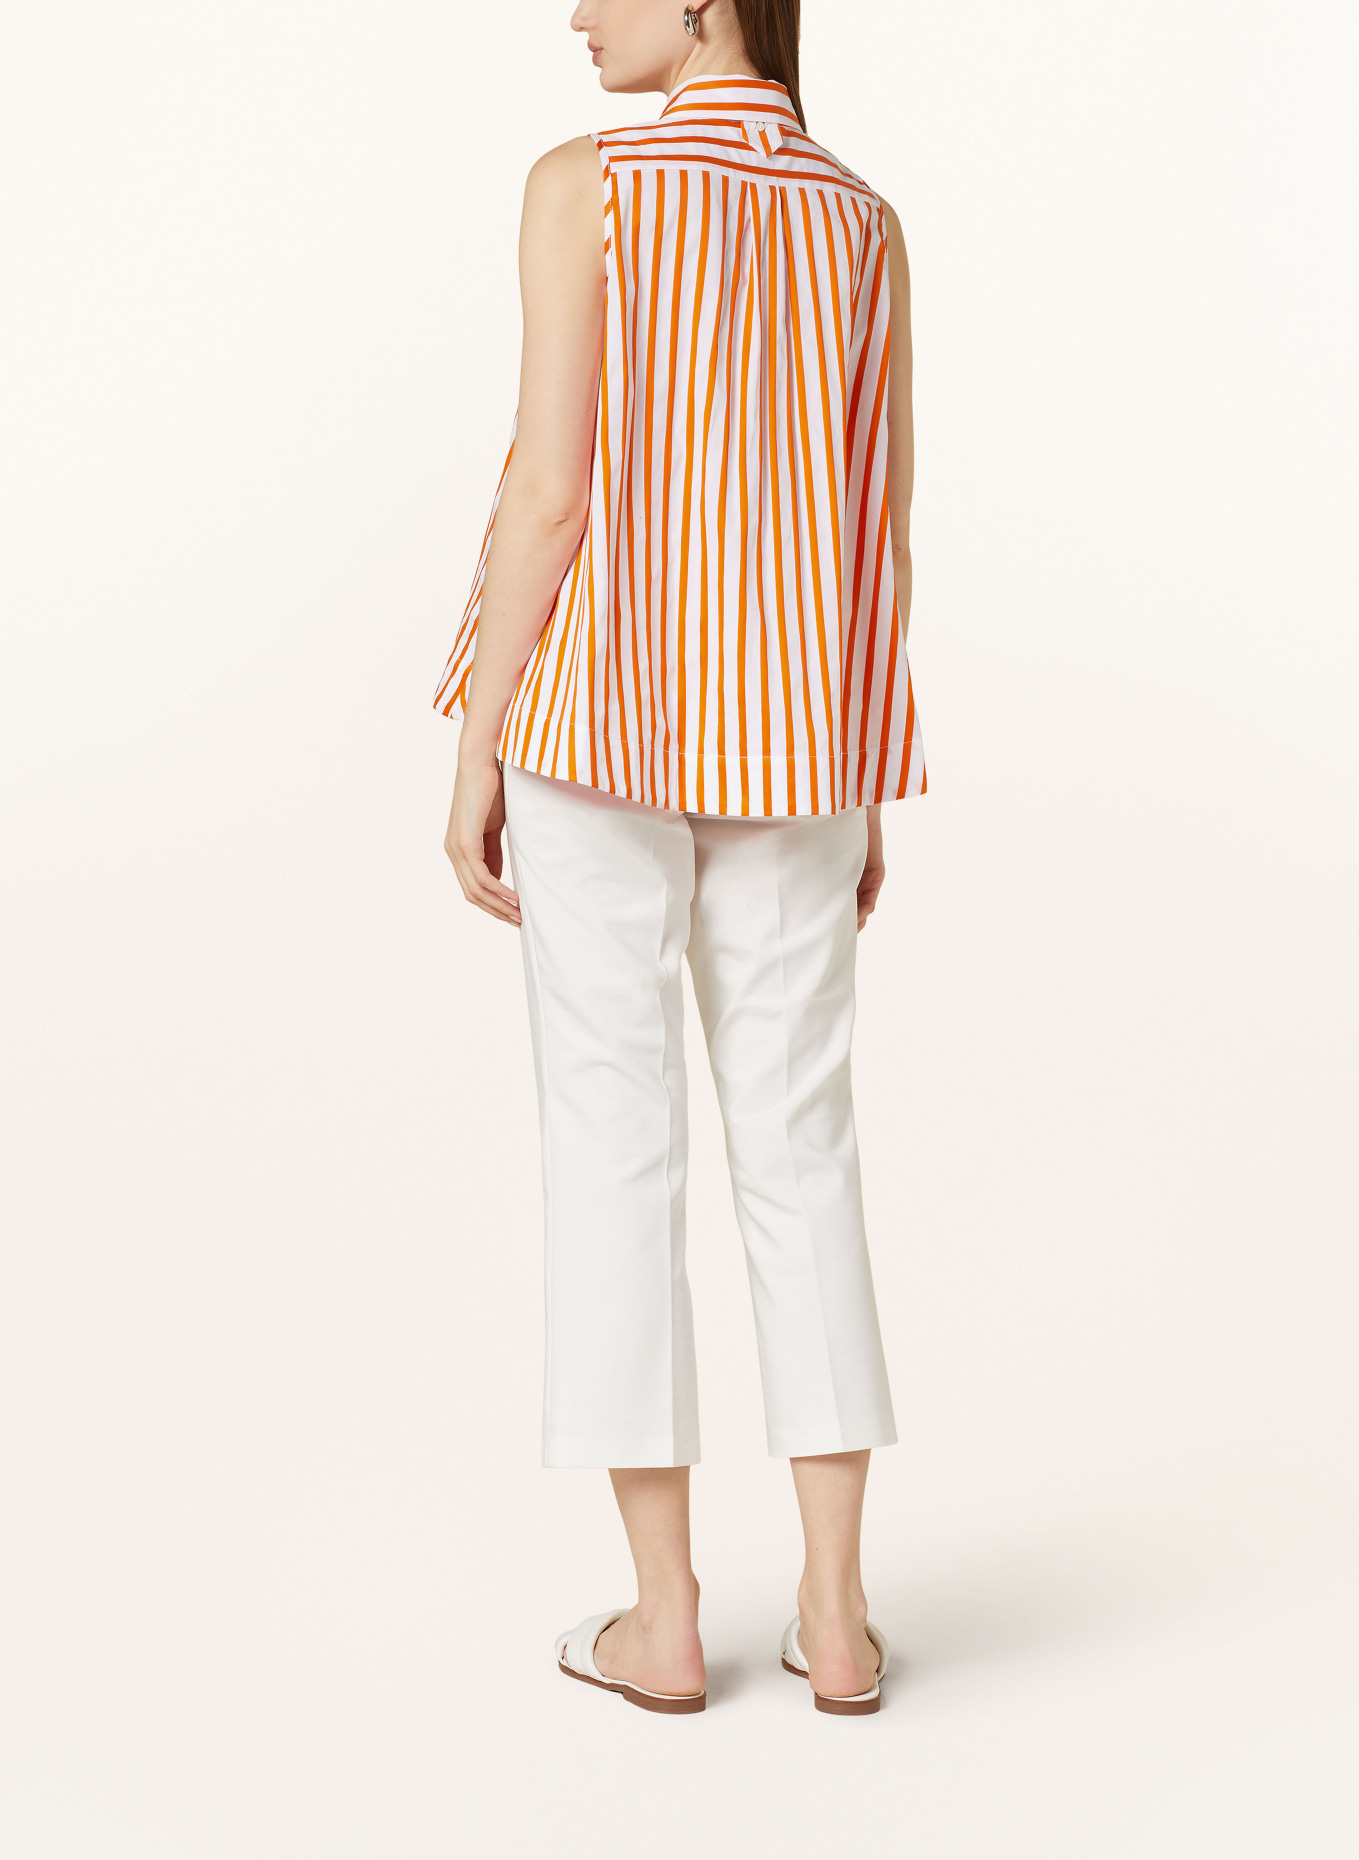 TONNO & PANNA Blouse top with bow, Color: WHITE/ ORANGE (Image 3)